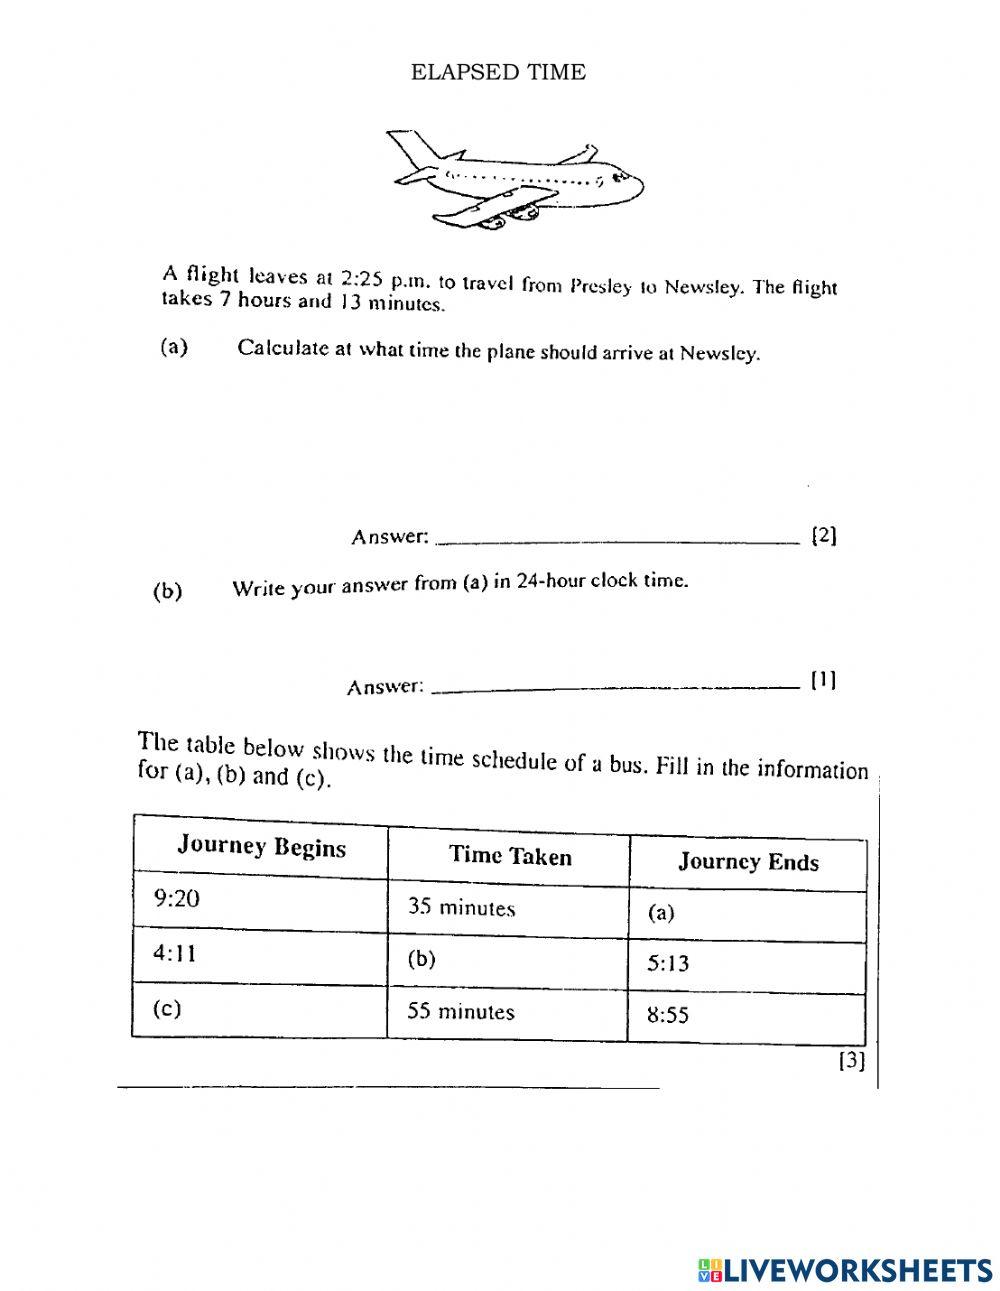 Elapsed Time BJC Questions